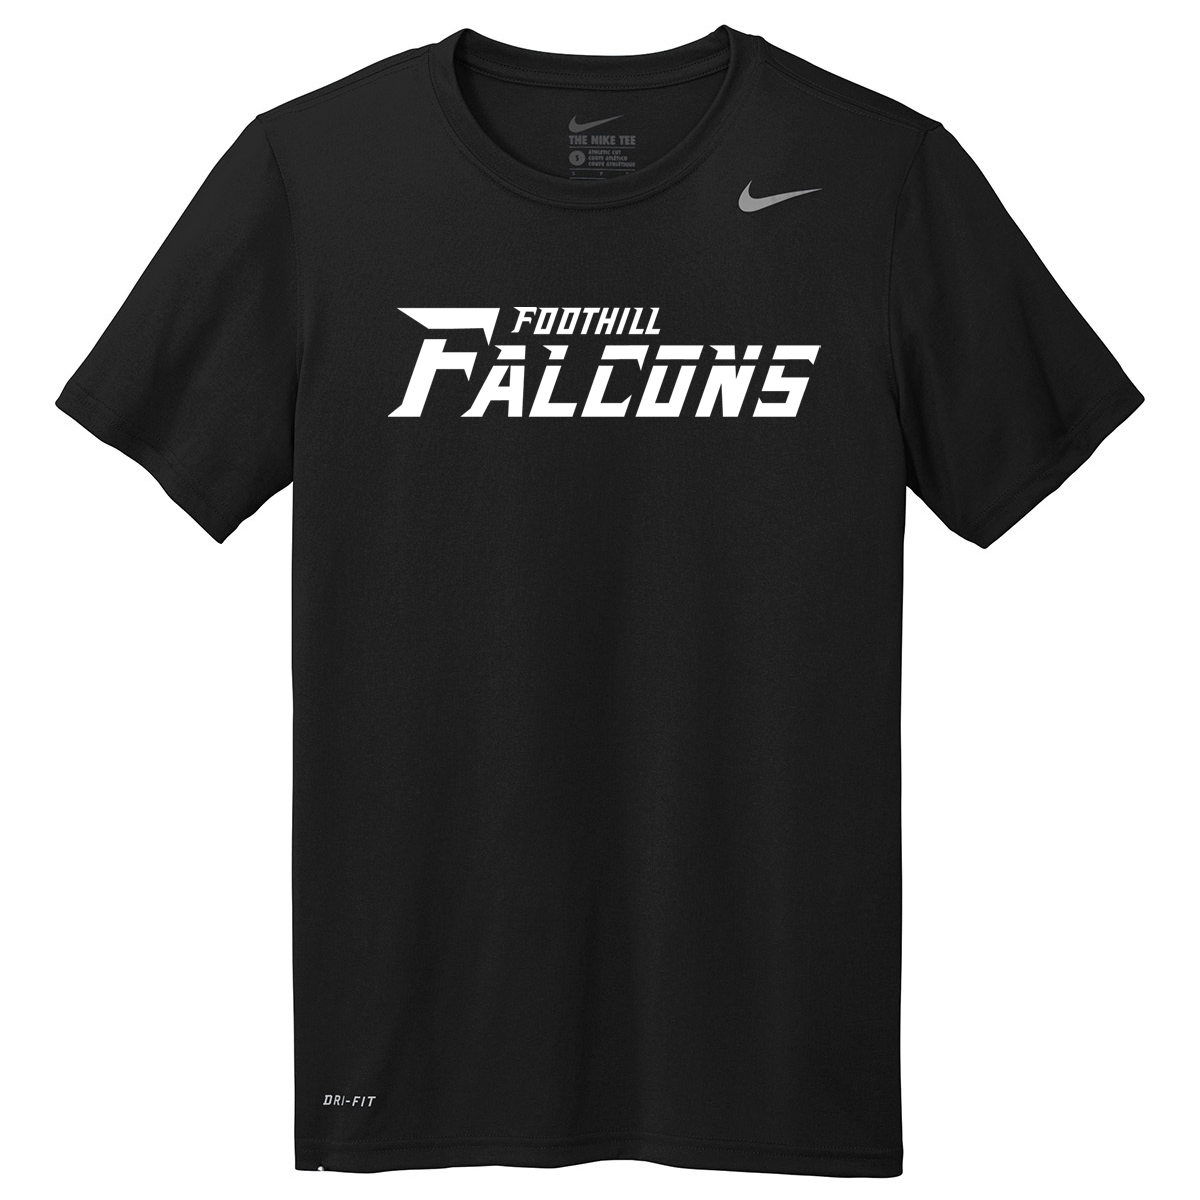 Foothill Falcons Nike rLegend Tee